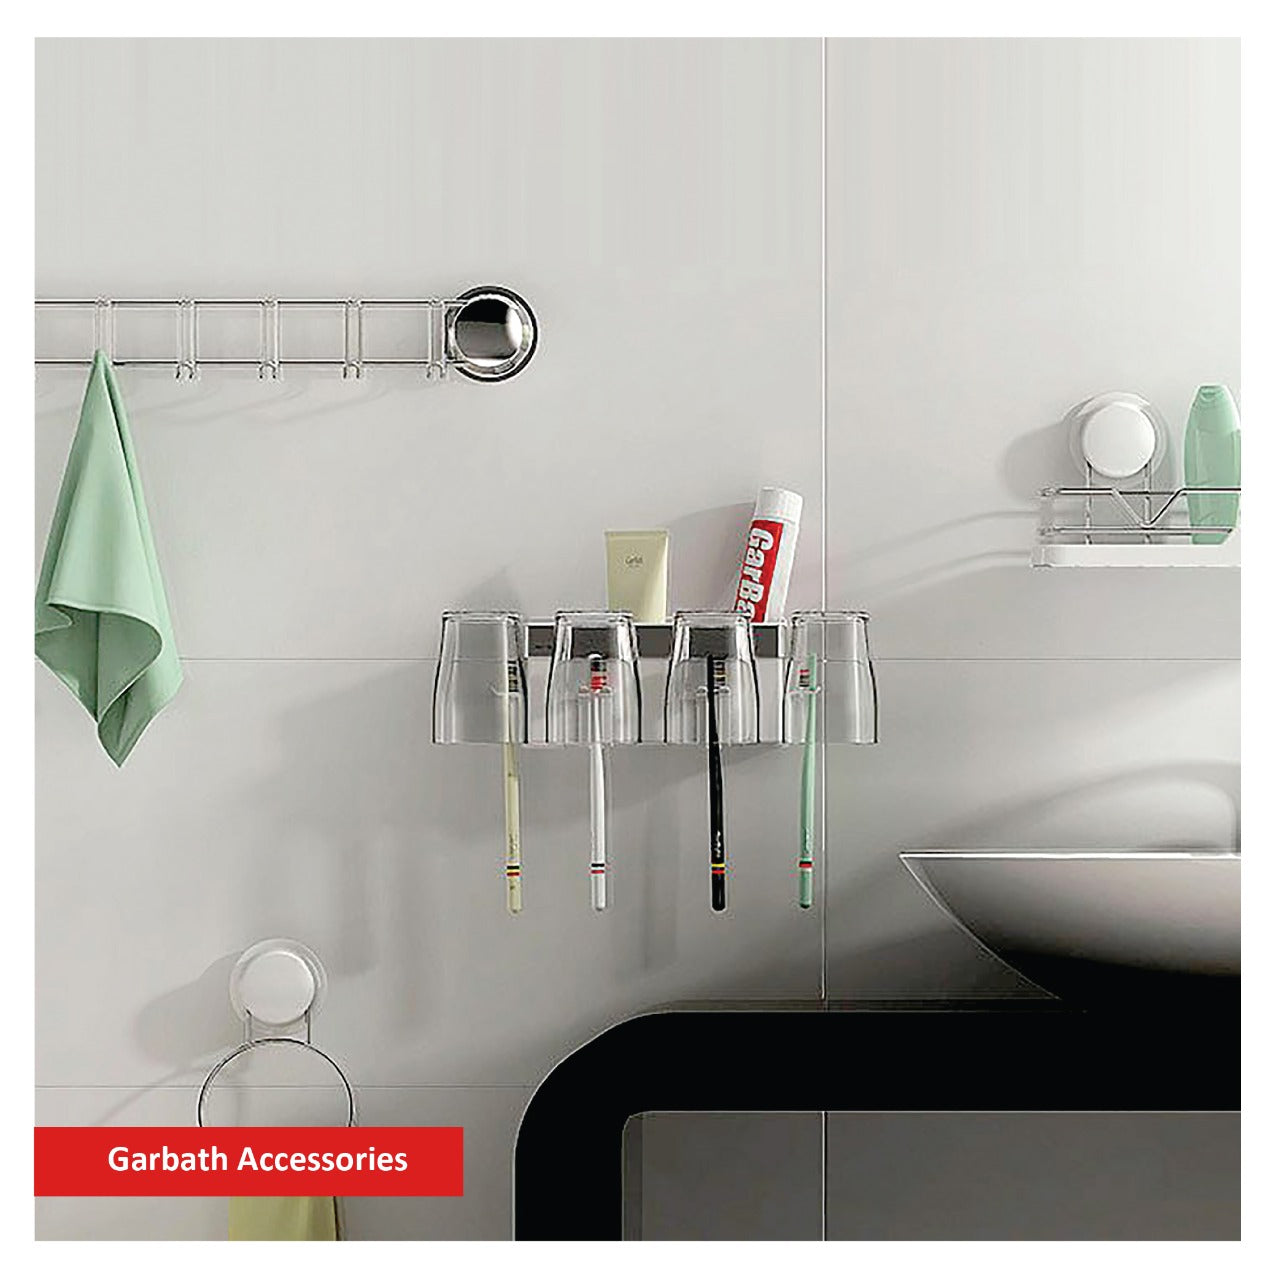 Garbath Bathroom Accessories - Elevate Your Bathroom. Shop Now for Quality and Stylish Bathroom Accessories at M. M. Noorbhoy & Co.